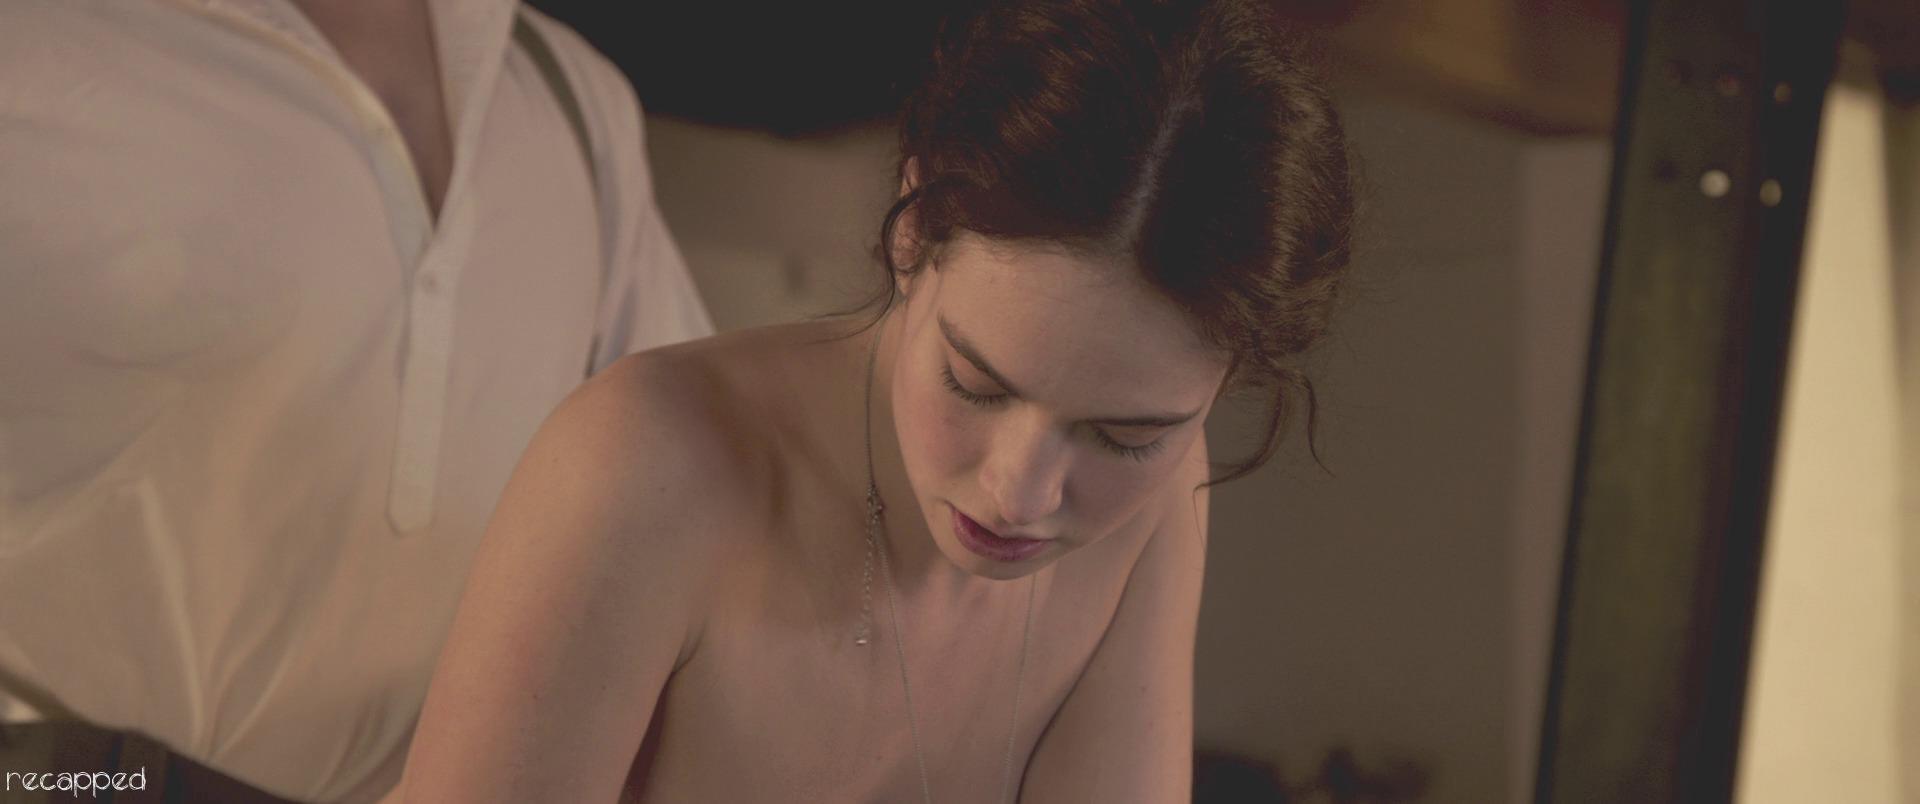 Lily james ever been nude